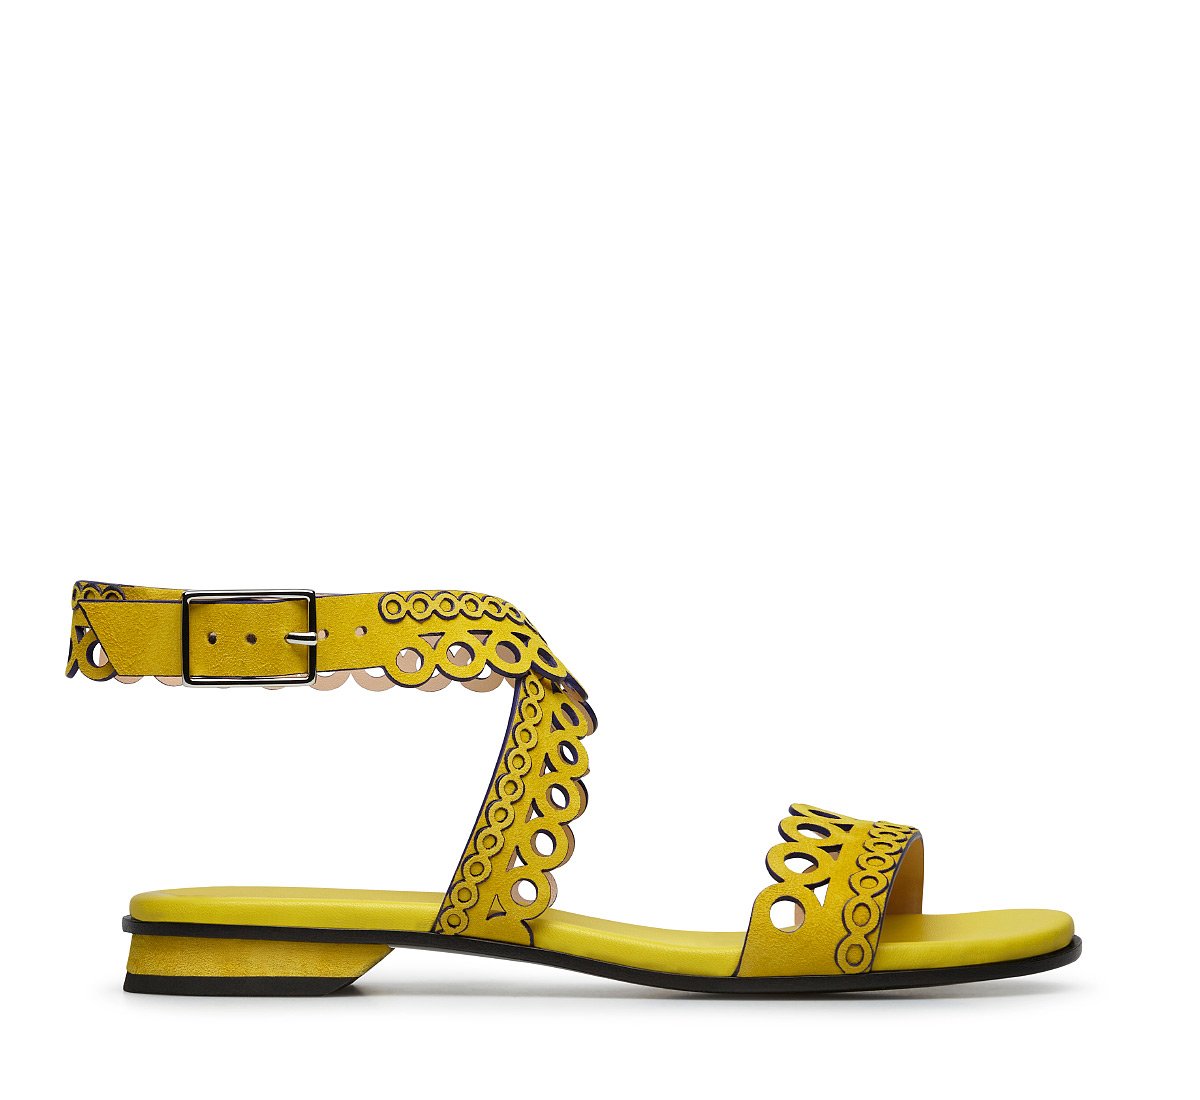 Sandals with perforated pattern